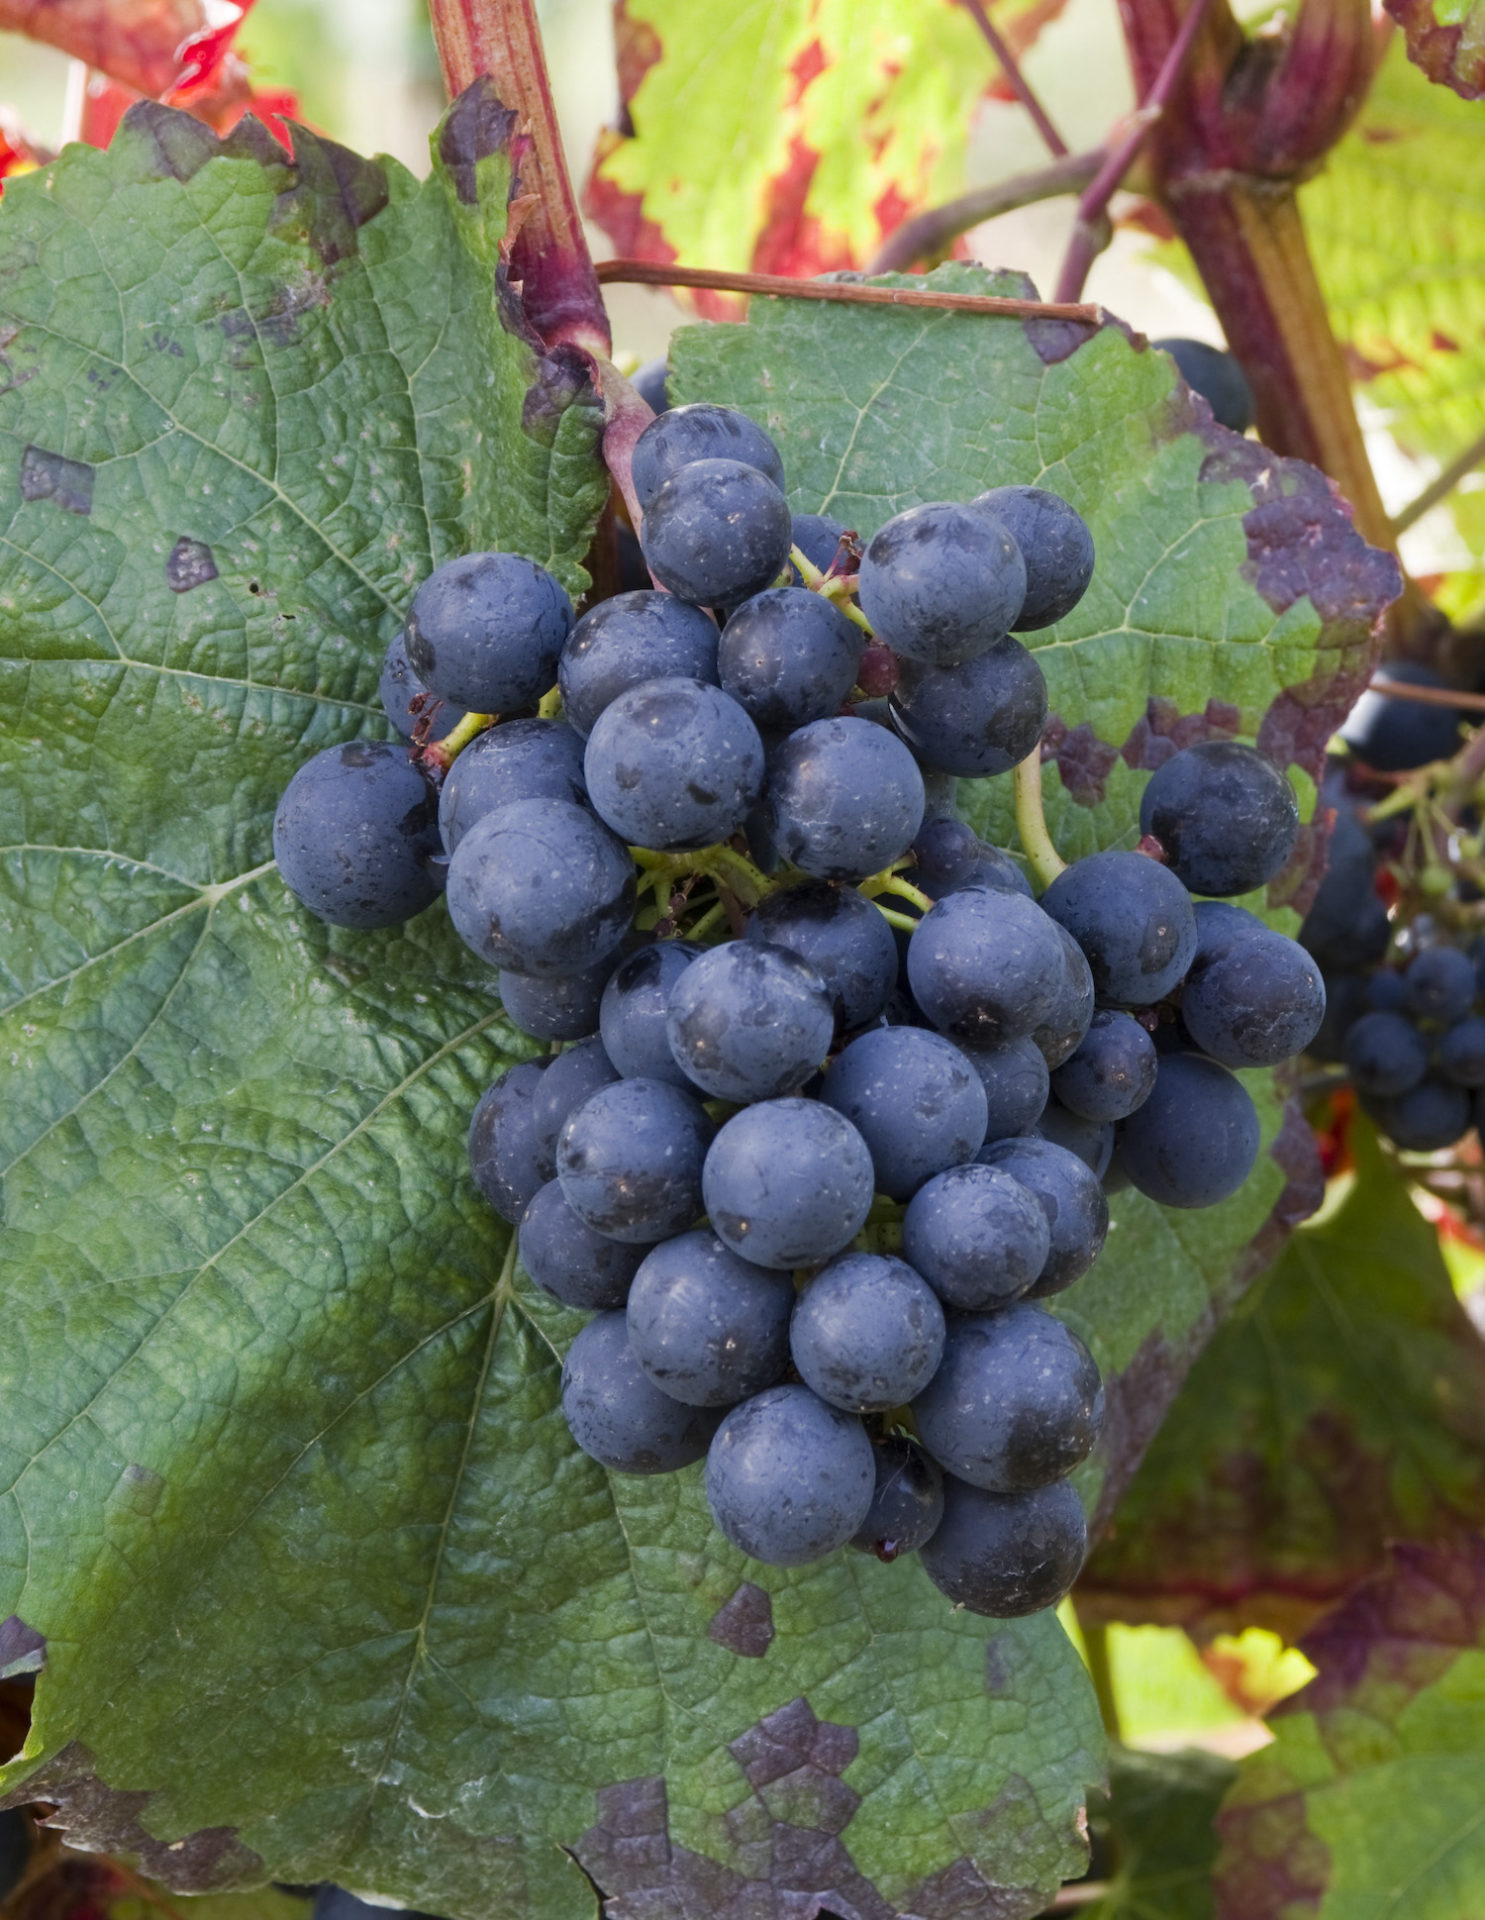 A Malbec grape on the vine with a large vine leaf in the background